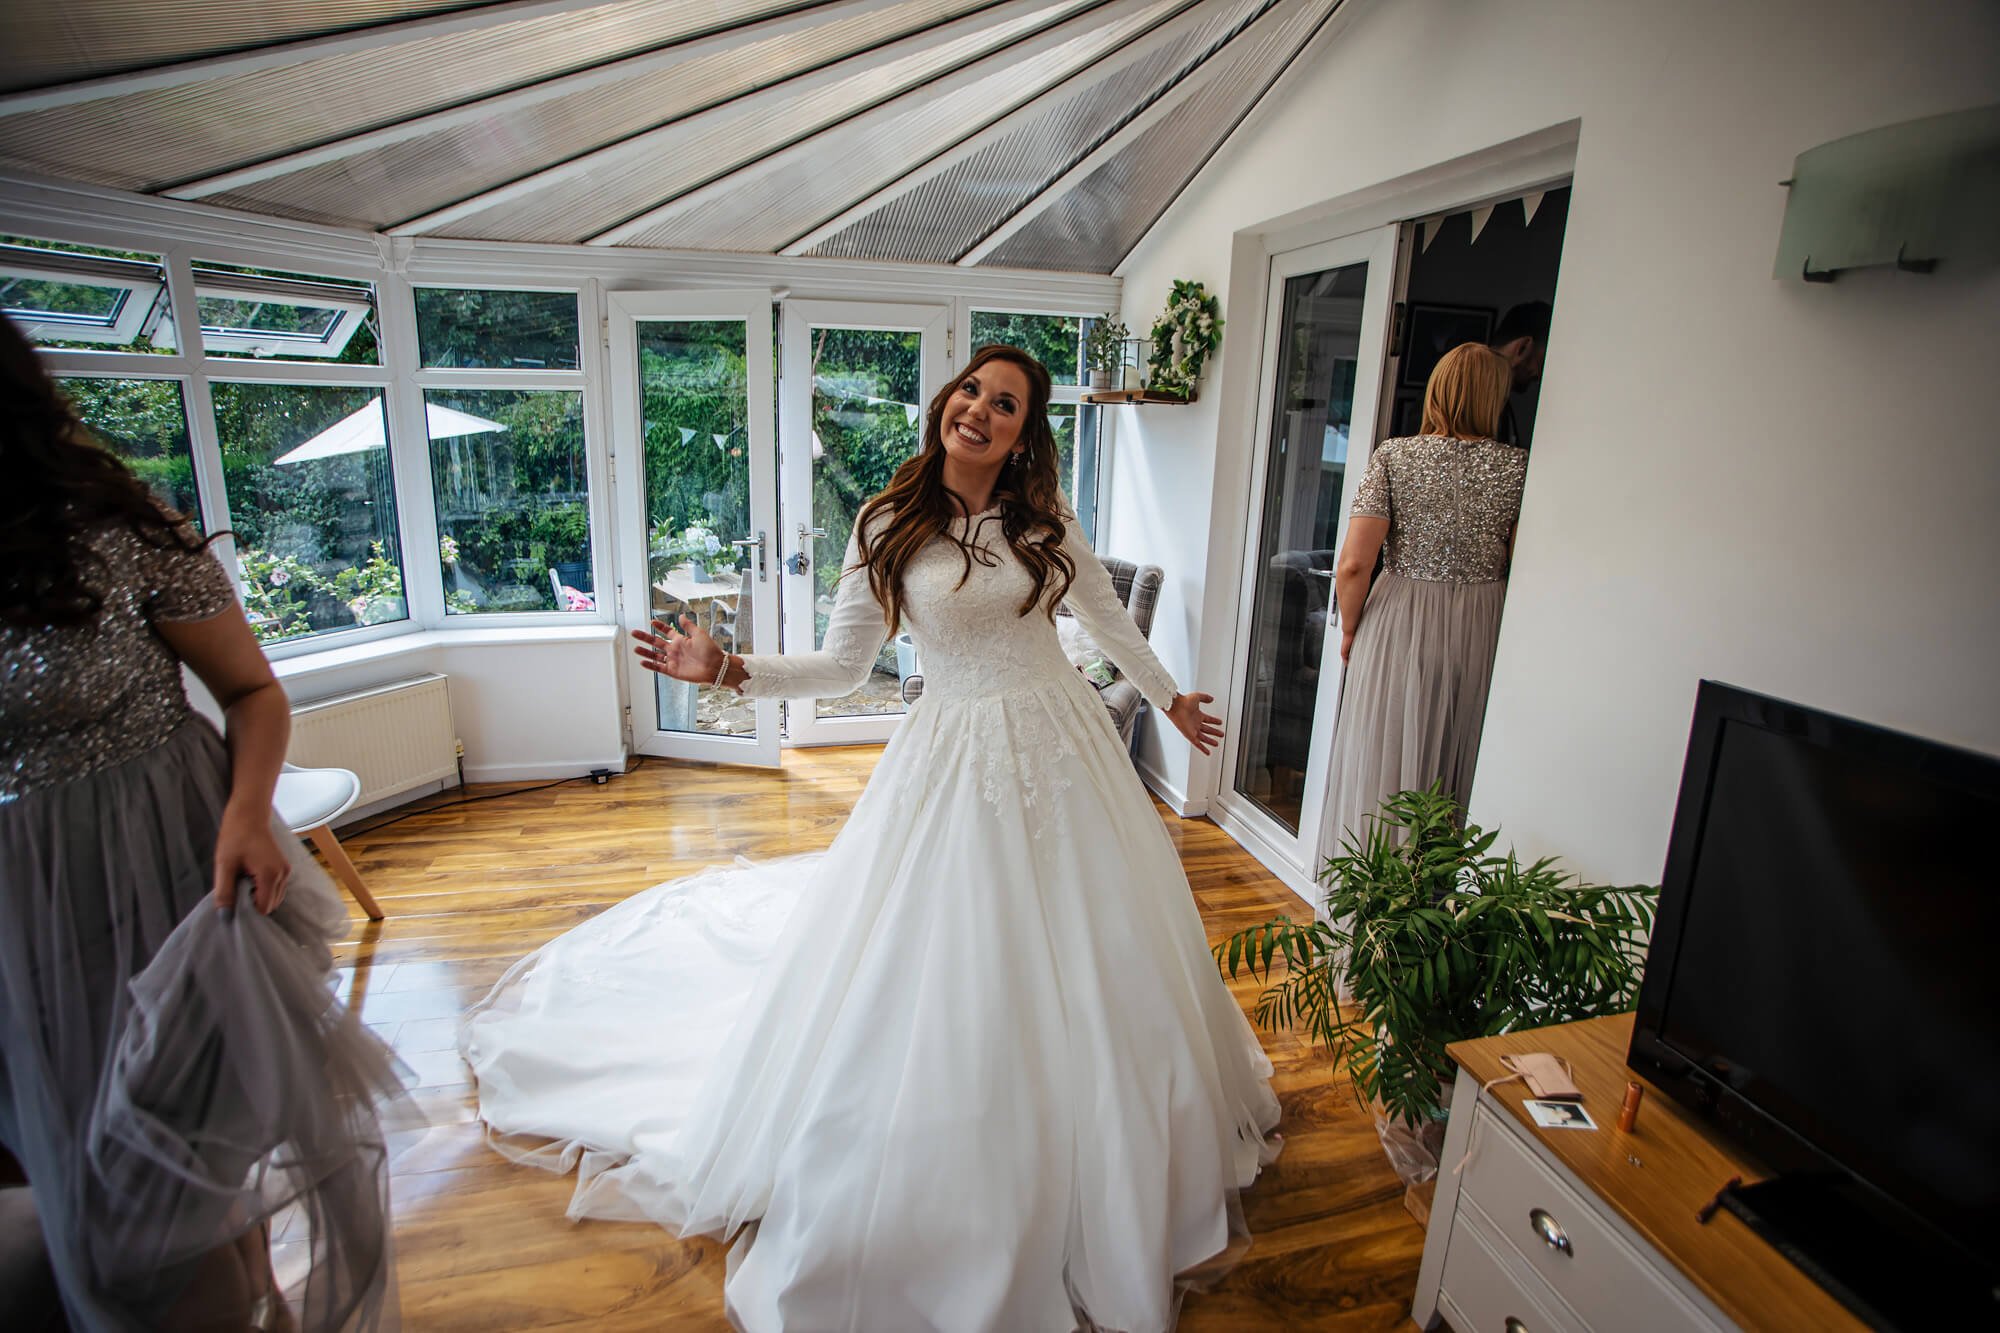 Bride poses in her wedding dress in the morning